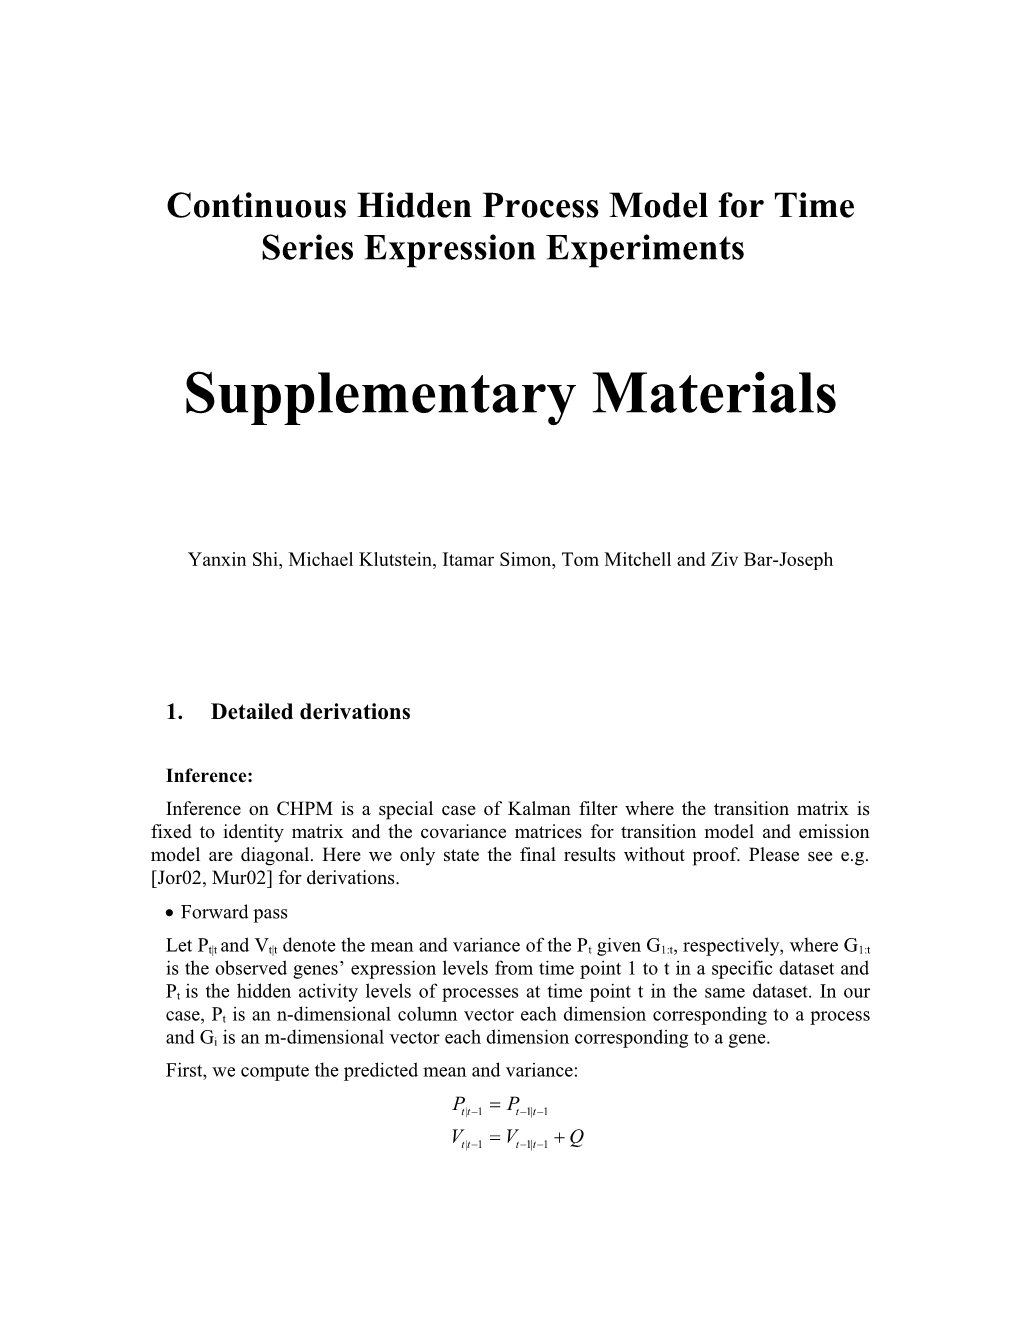 Continuous Hidden Process Model for Time Series Expression Experiments